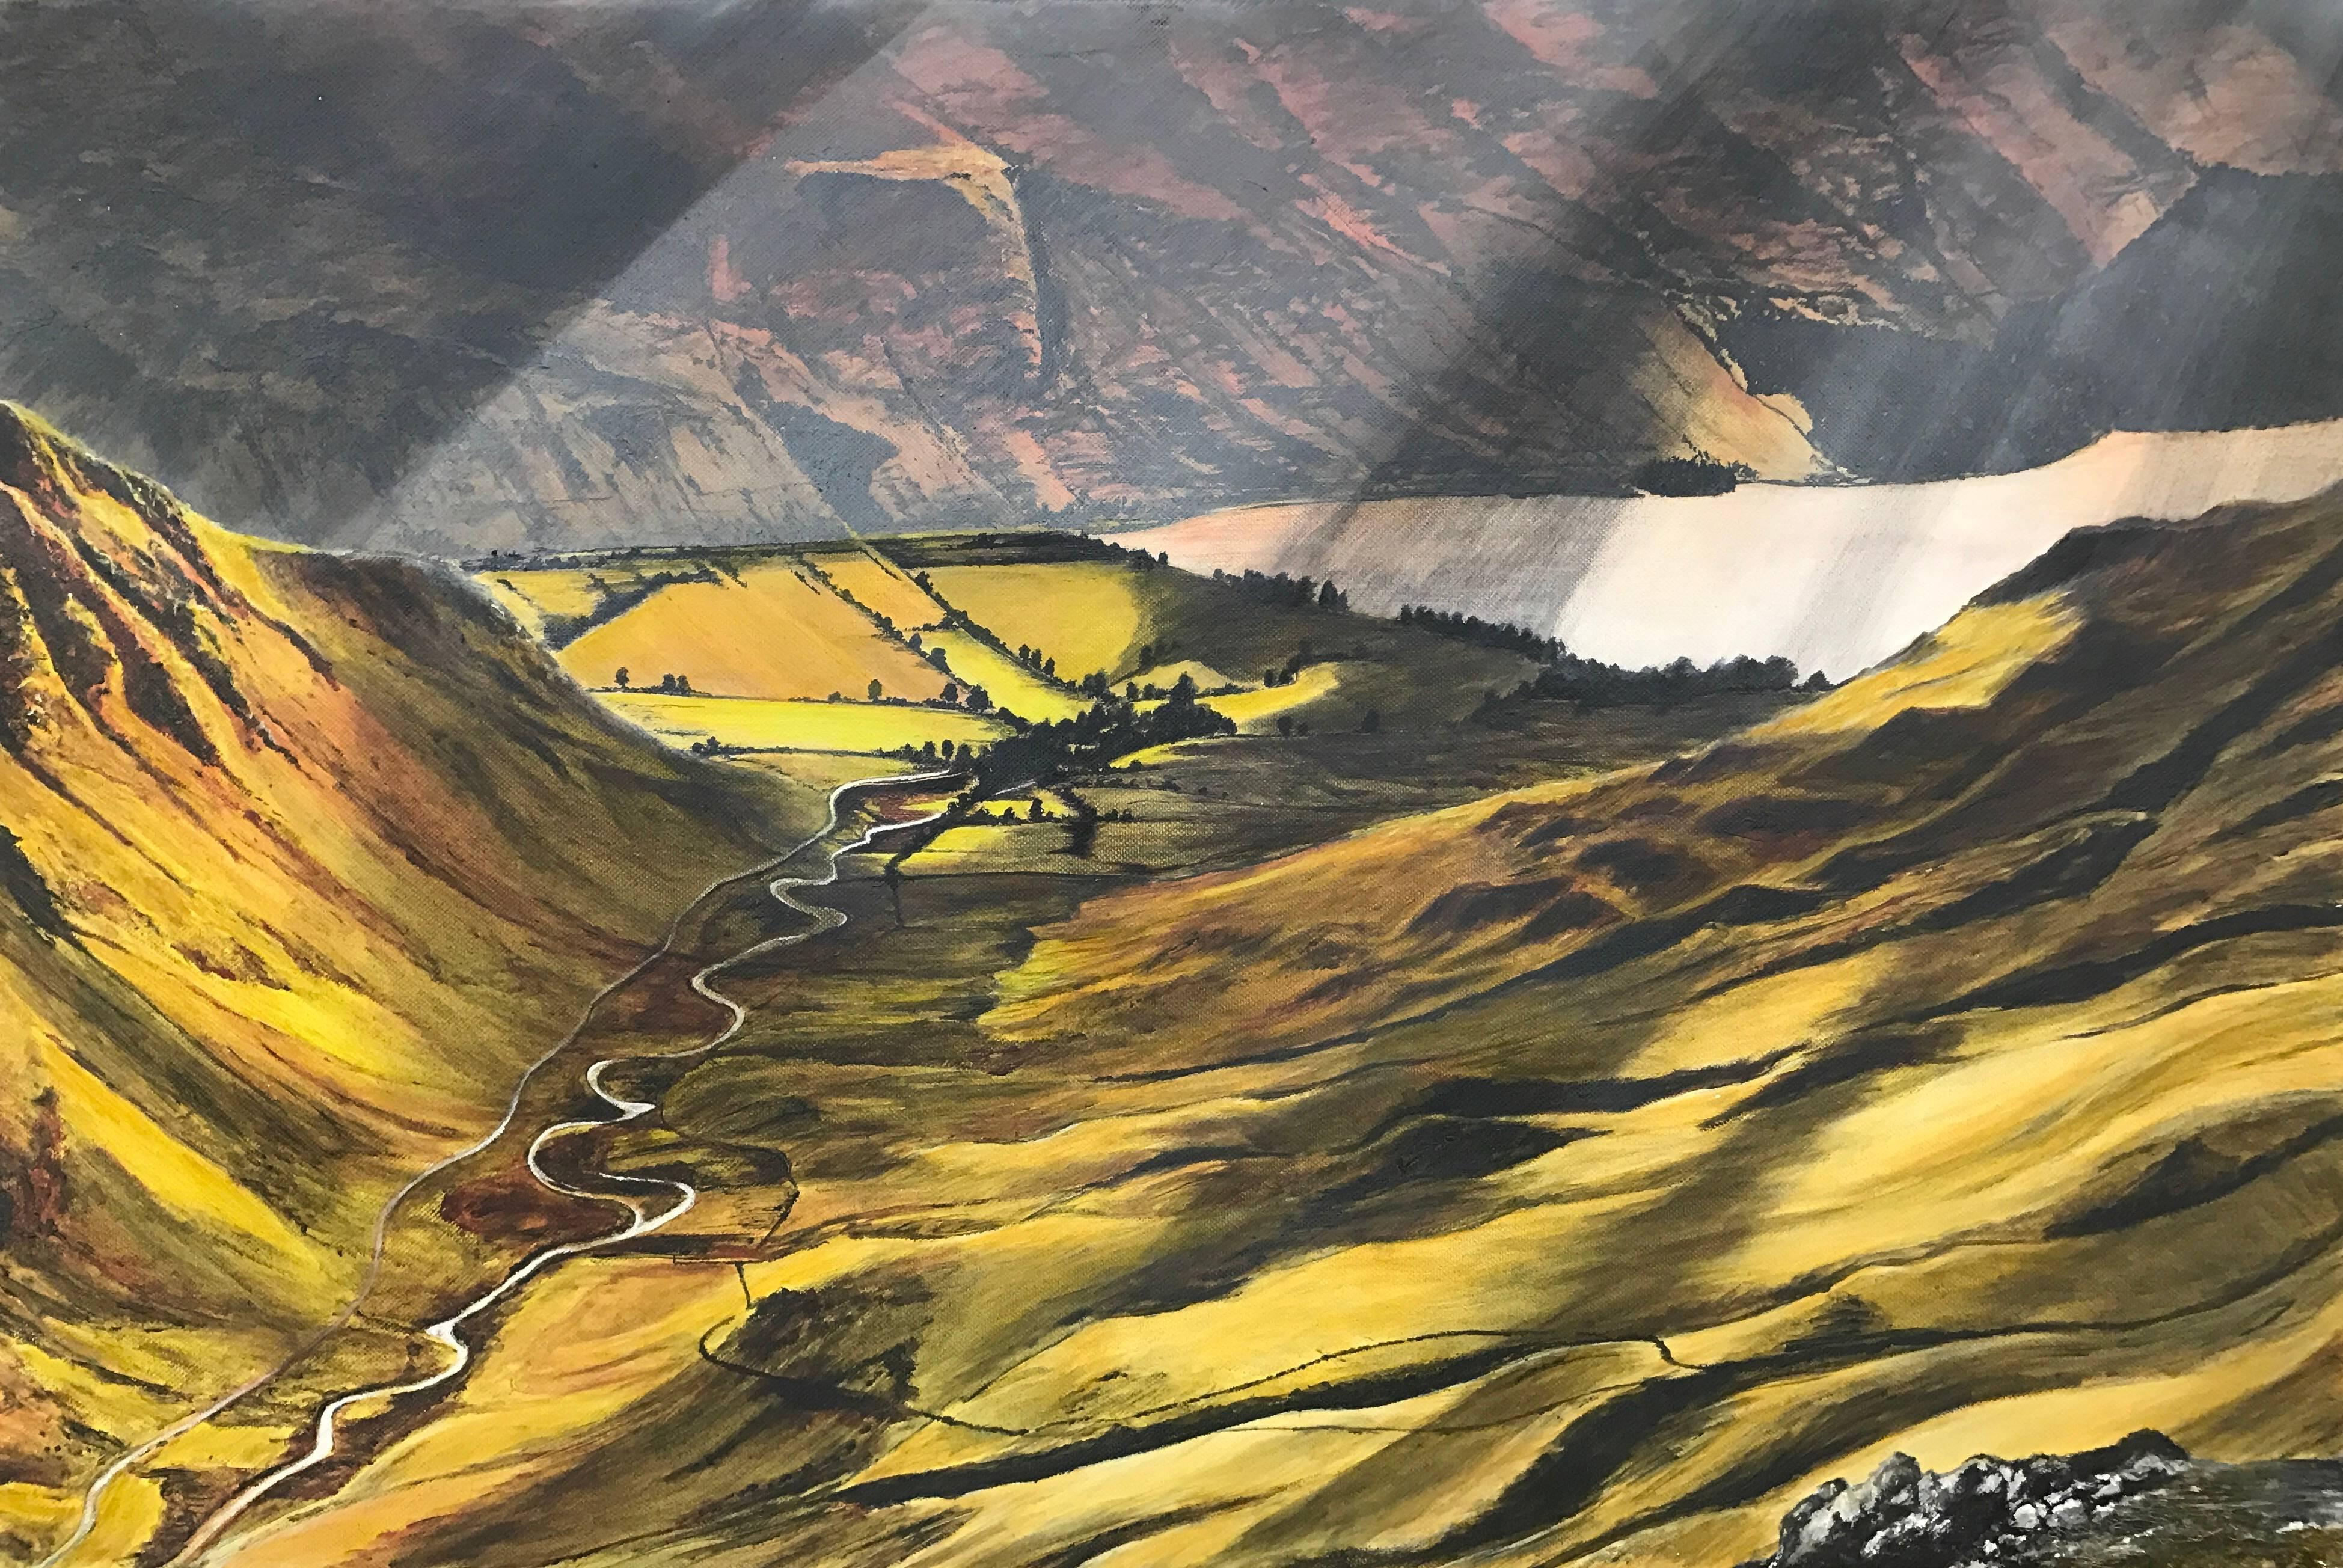 Landscape Painting of the English Lake District by British Contemporary Artist